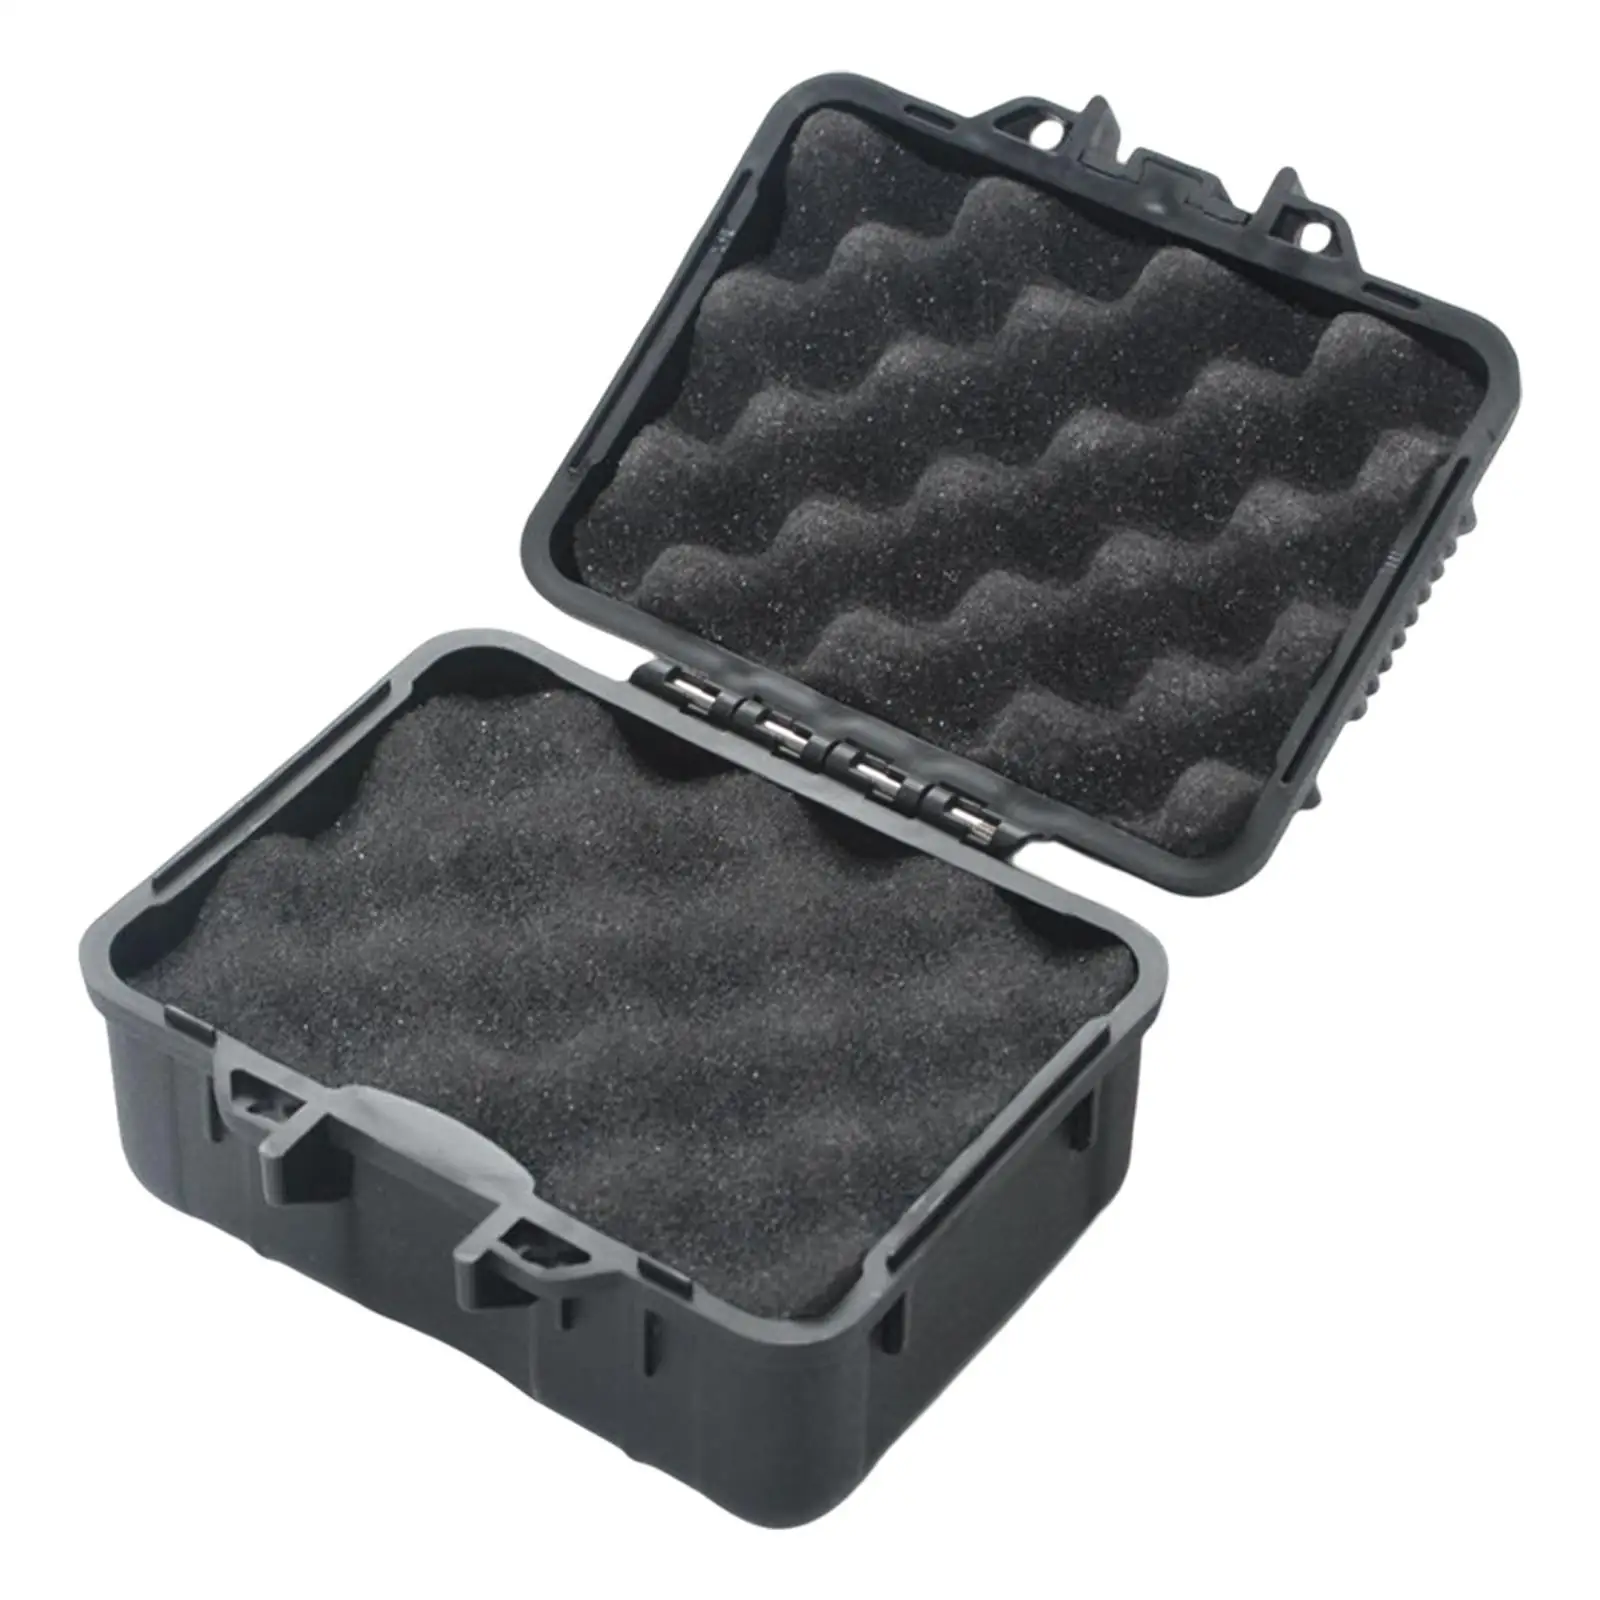 Impact Resistant Tool Box with Foam Widely Used Safety Anti-Collision Shock GC 1 Toolbox for Outdoor Photography Aviation